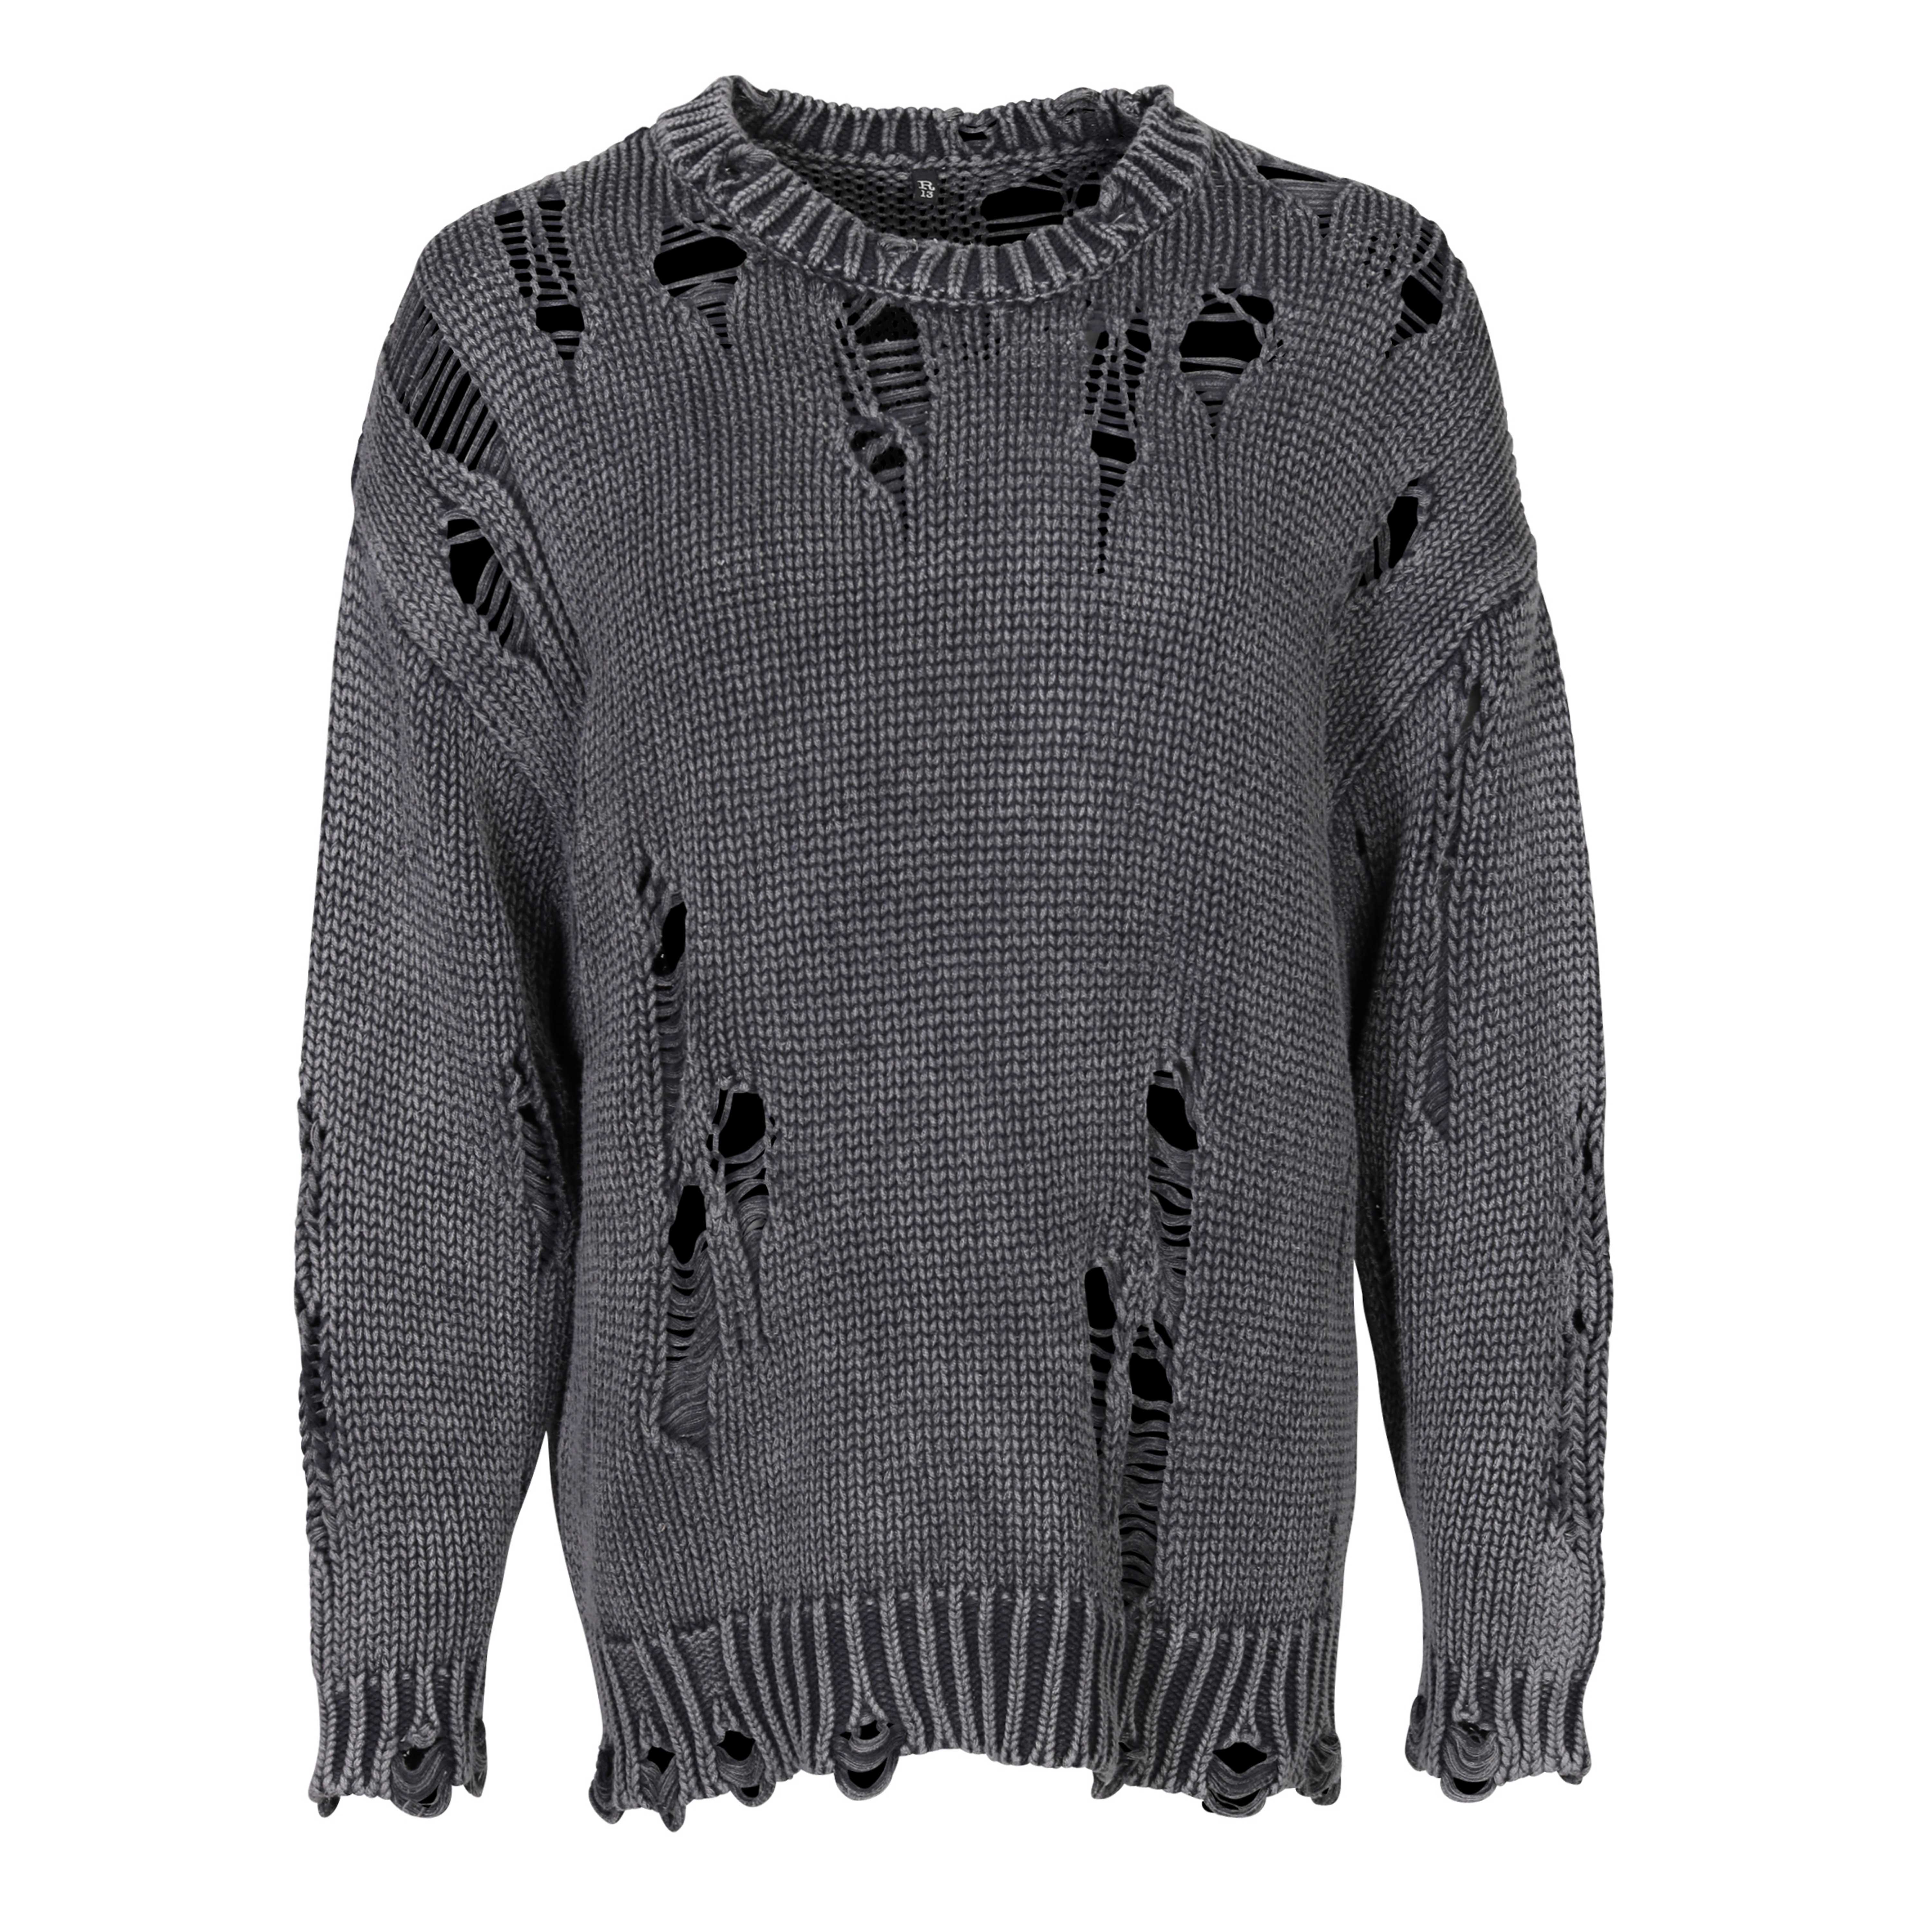 R13 Distressed Oversized Sweater in Acid Black S